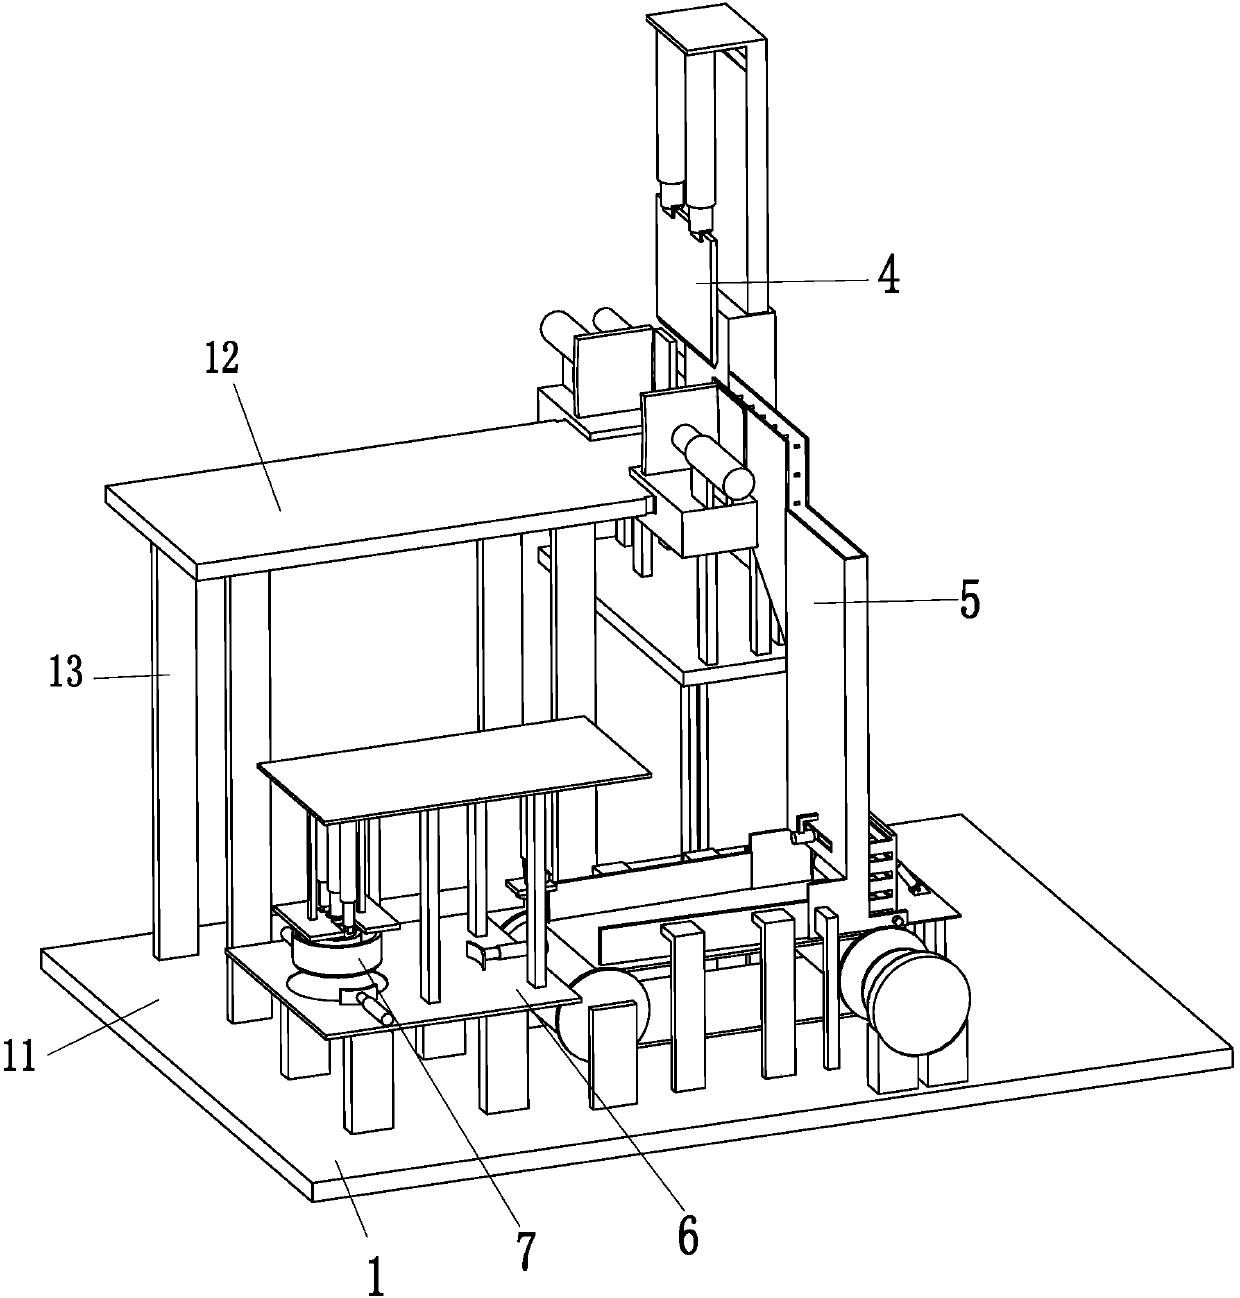 Equipment for automatically conveying metal graphite rod slices and processing graphite gaskets